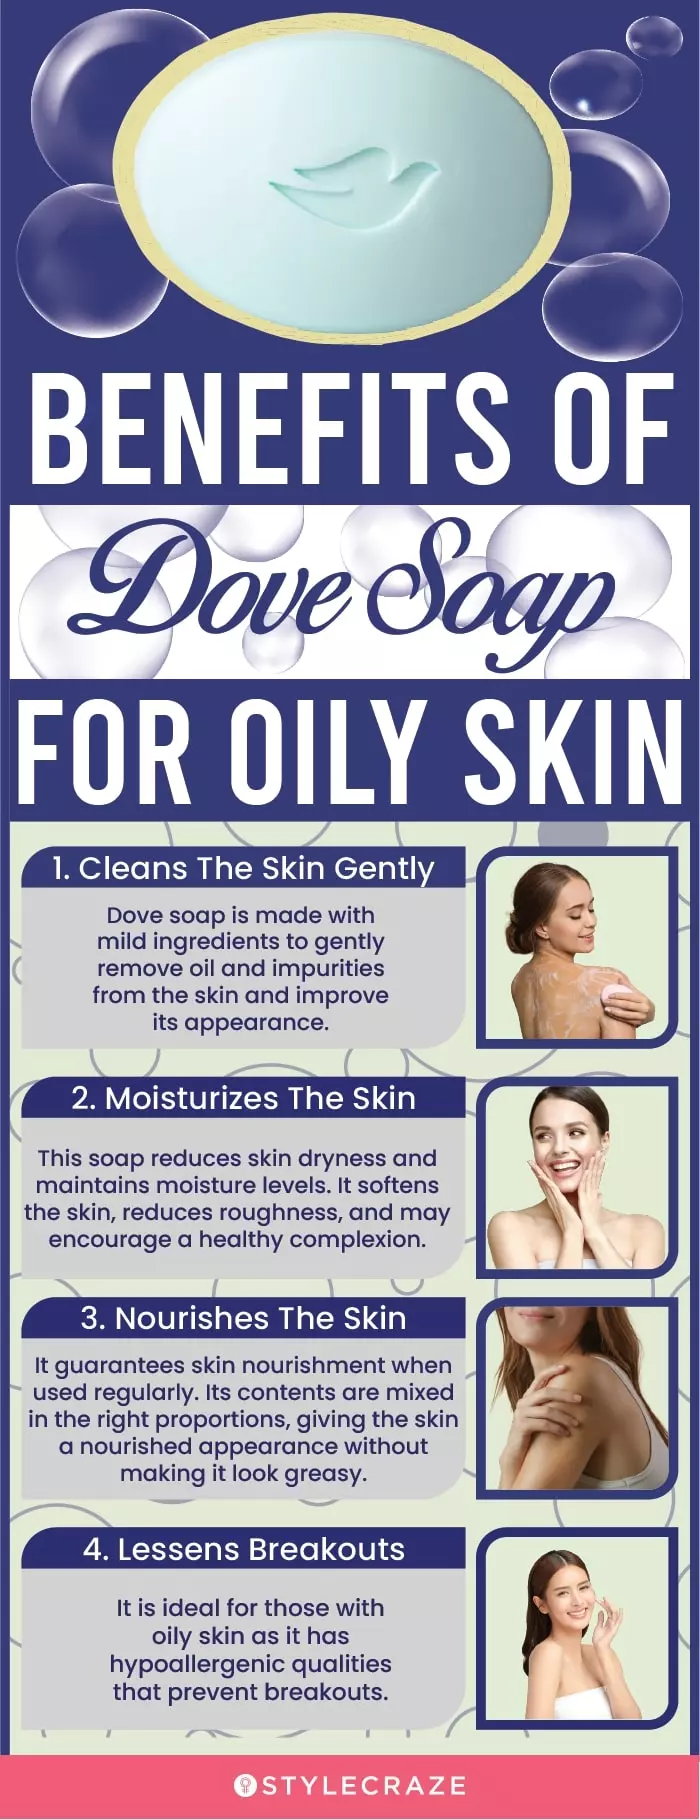 benefits of dove soap for oily skin (infographic)